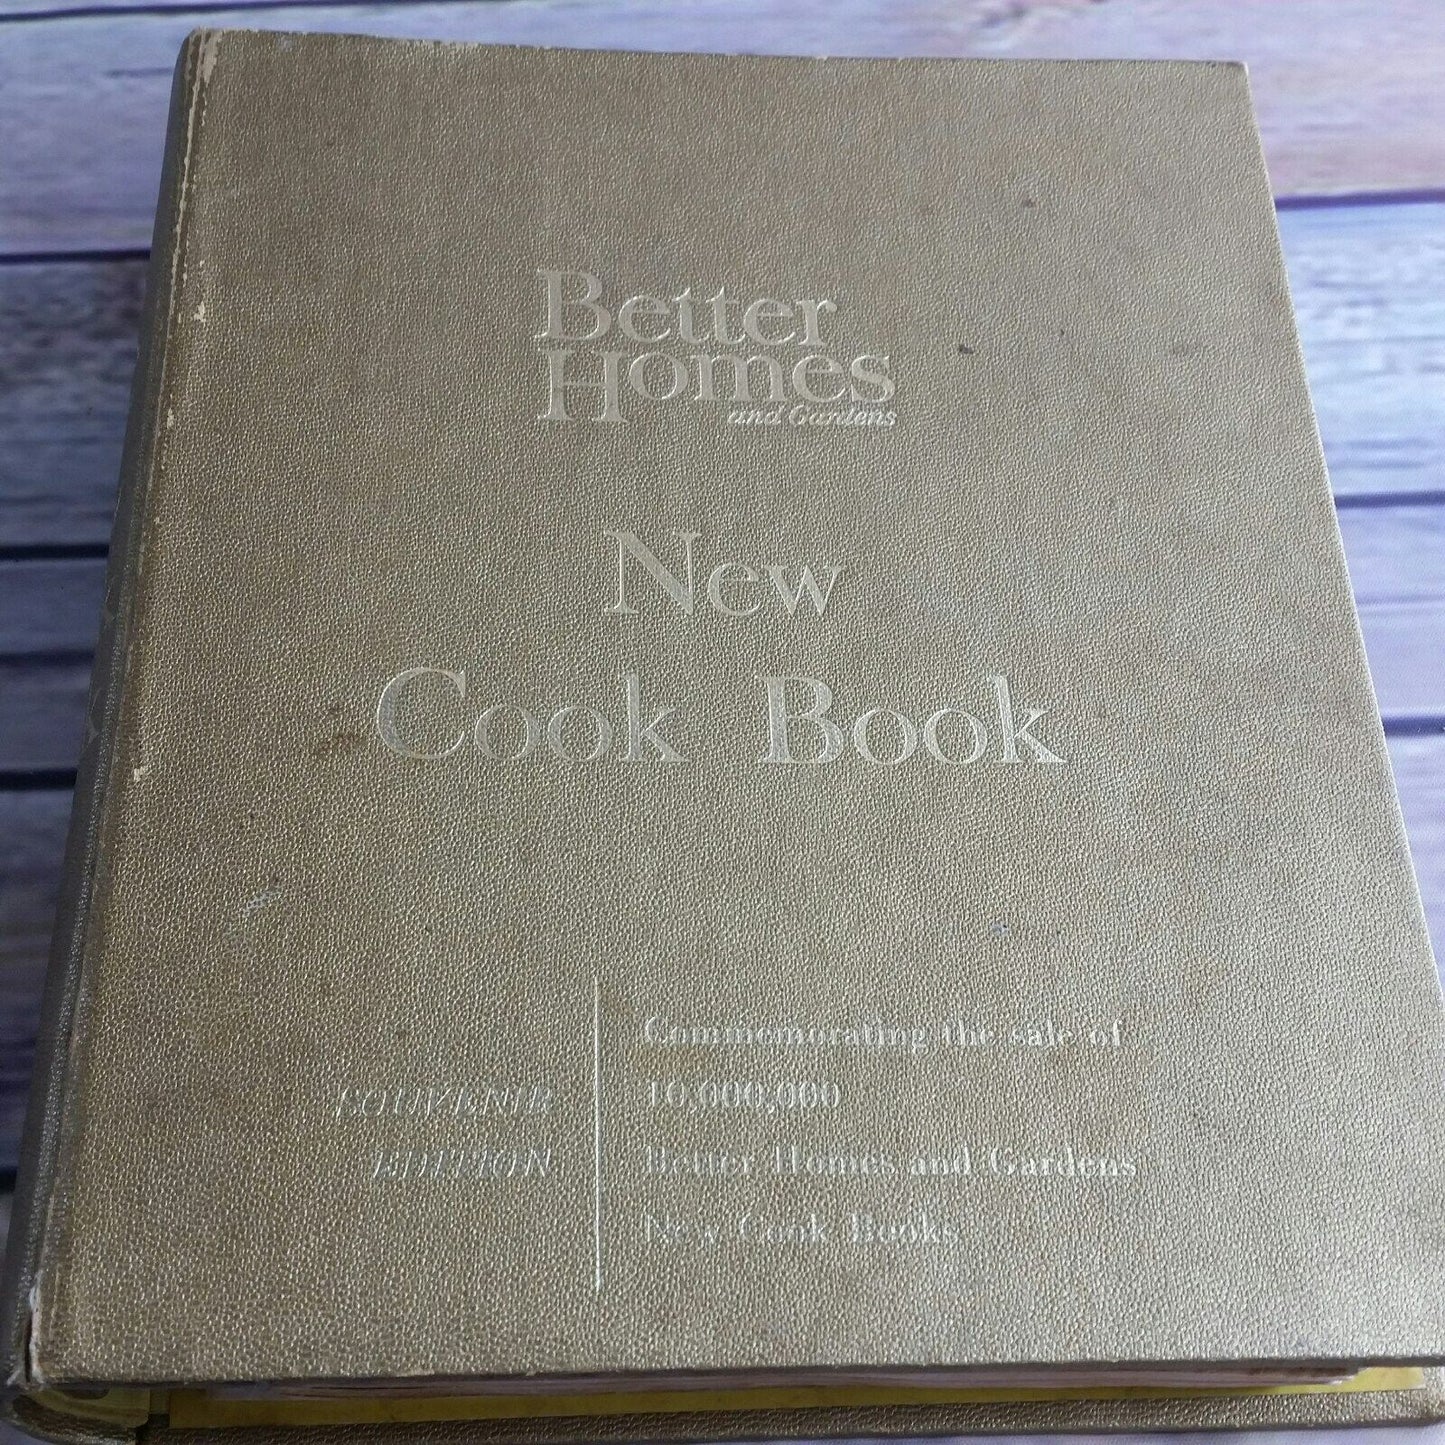 Vintage Better Homes and Gardens New Cookbook Recipes 5 Ring Binder 1965 Hardcover 1960s Gold Cover Souvenir Edition Commemoration